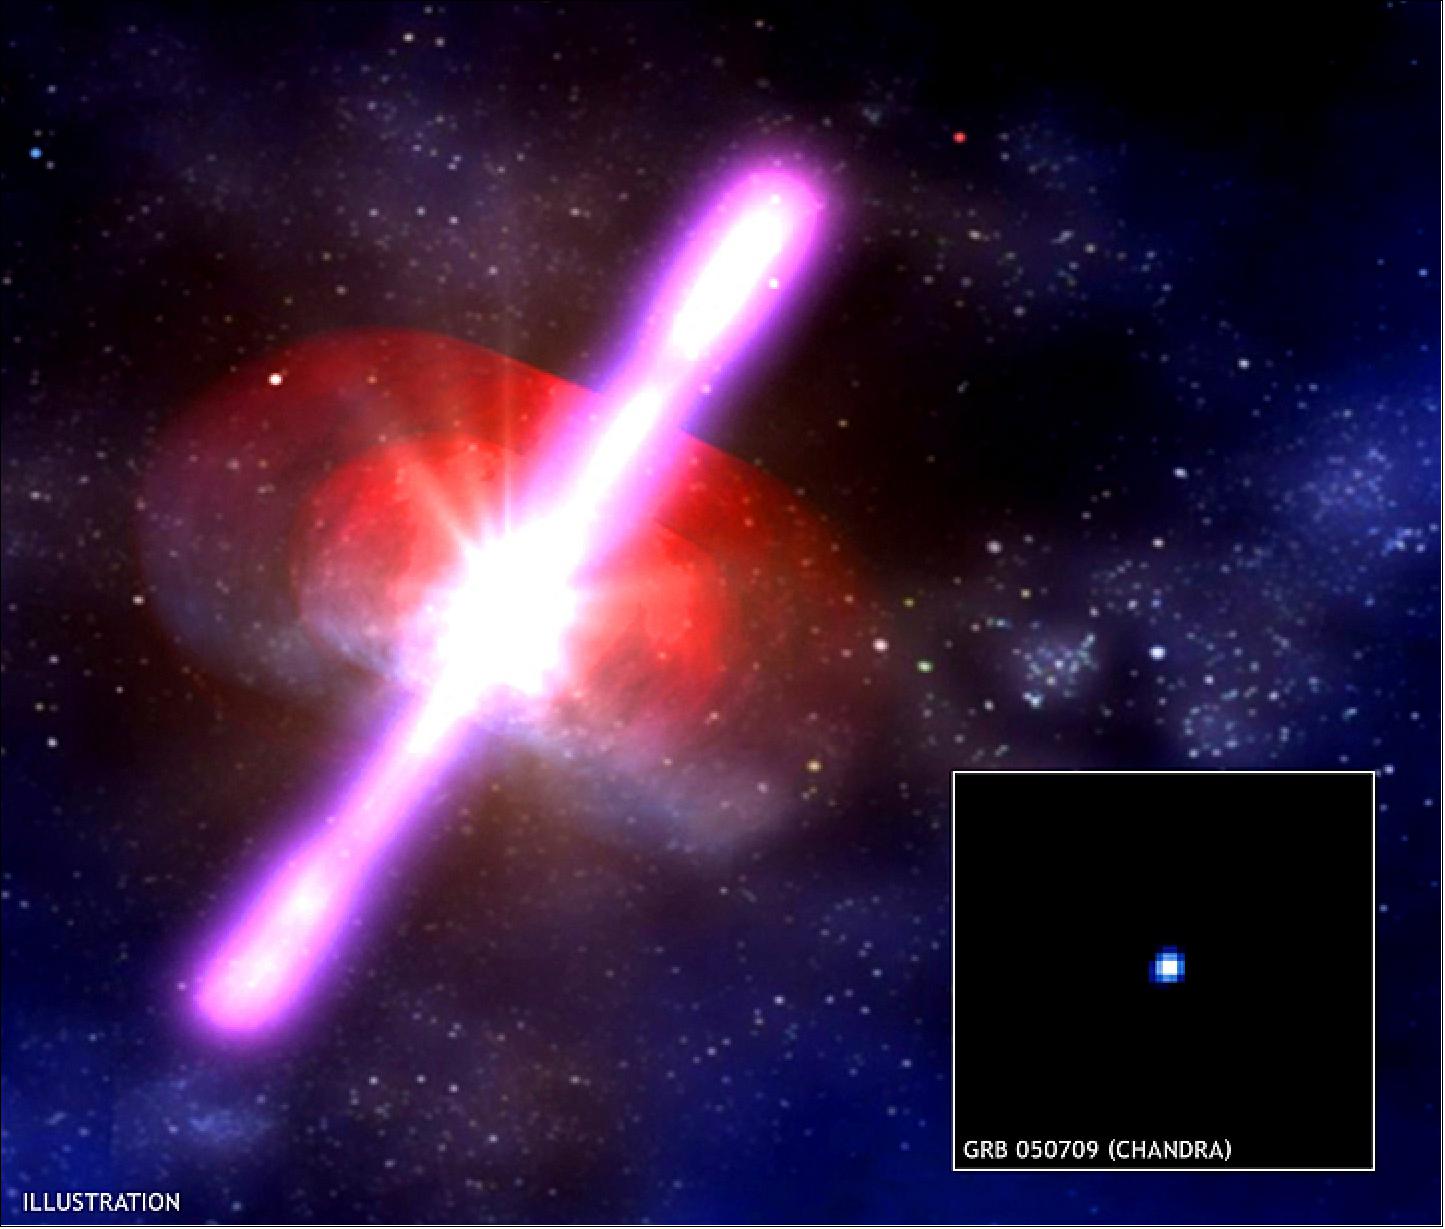 Figure 55: An artist's rendering (left) of GRB 050709 depicts a gamma-ray burst that was discovered on 9 July, 2005 by NASA's High-Energy Transient Explorer. The burst radiated an enormous amount of energy in gamma-rays for half a second, then faded away. Three days later, Chandra's detection of the X-ray afterglow (inset) established its position with high accuracy (image credit: X-ray: NASA/CXC/Caltech/D. Fox et al.; Illustration: NASA/D. Berry)